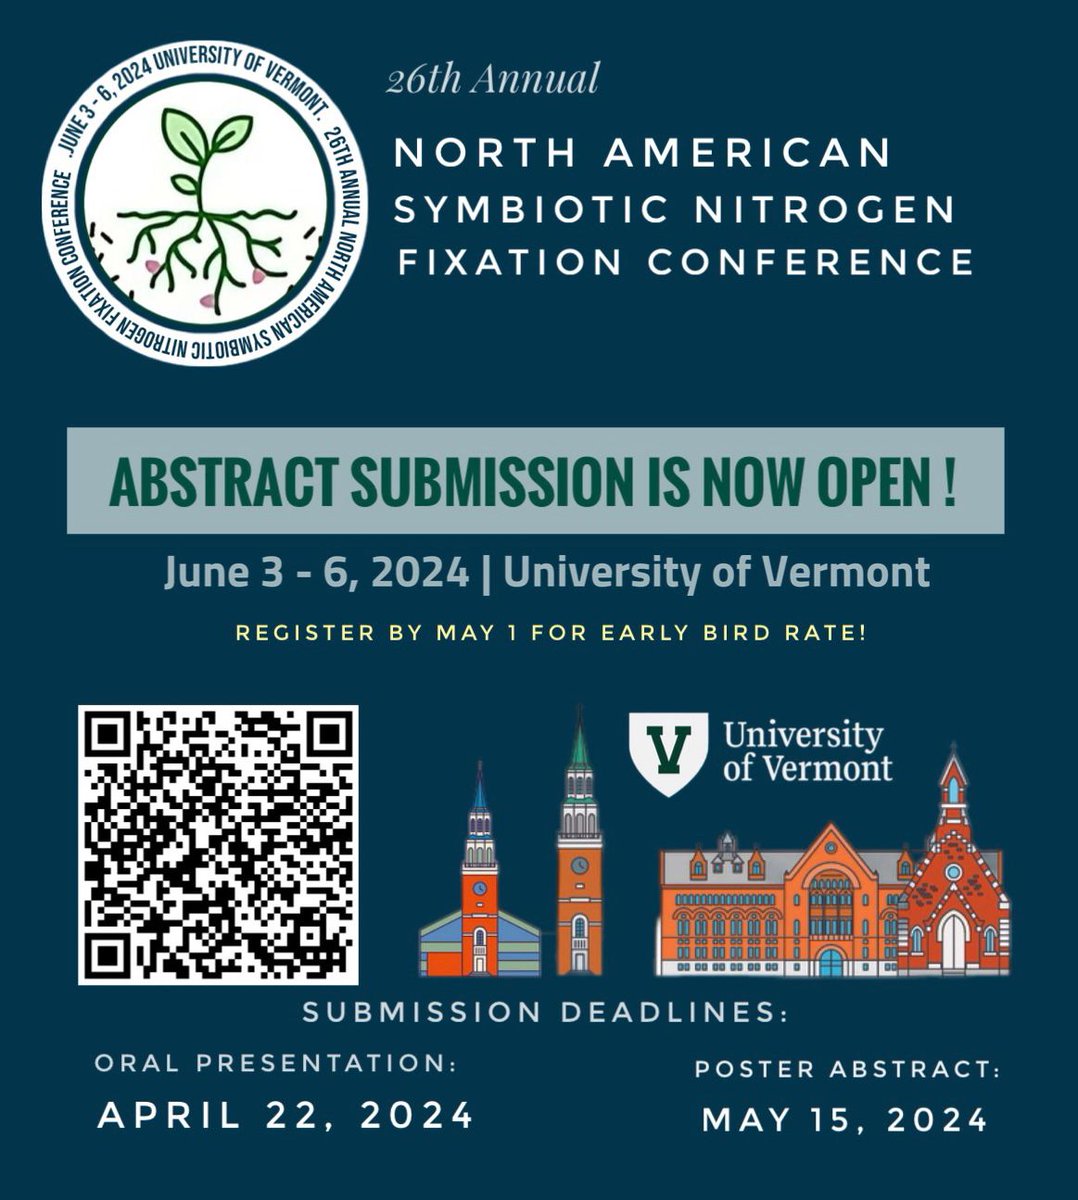 Get ready for great science, new findings, ideas & networking at the 26th Annual NASNFC June 3rd-6th 2024 @uvmvermont. Early registration closes May 1st. To register & submit an abstract, scan the QR code/visit nasnfc2024.wixsite.com/nasnfc/registr… Questions? contact @jmharris777 @UVMCALS